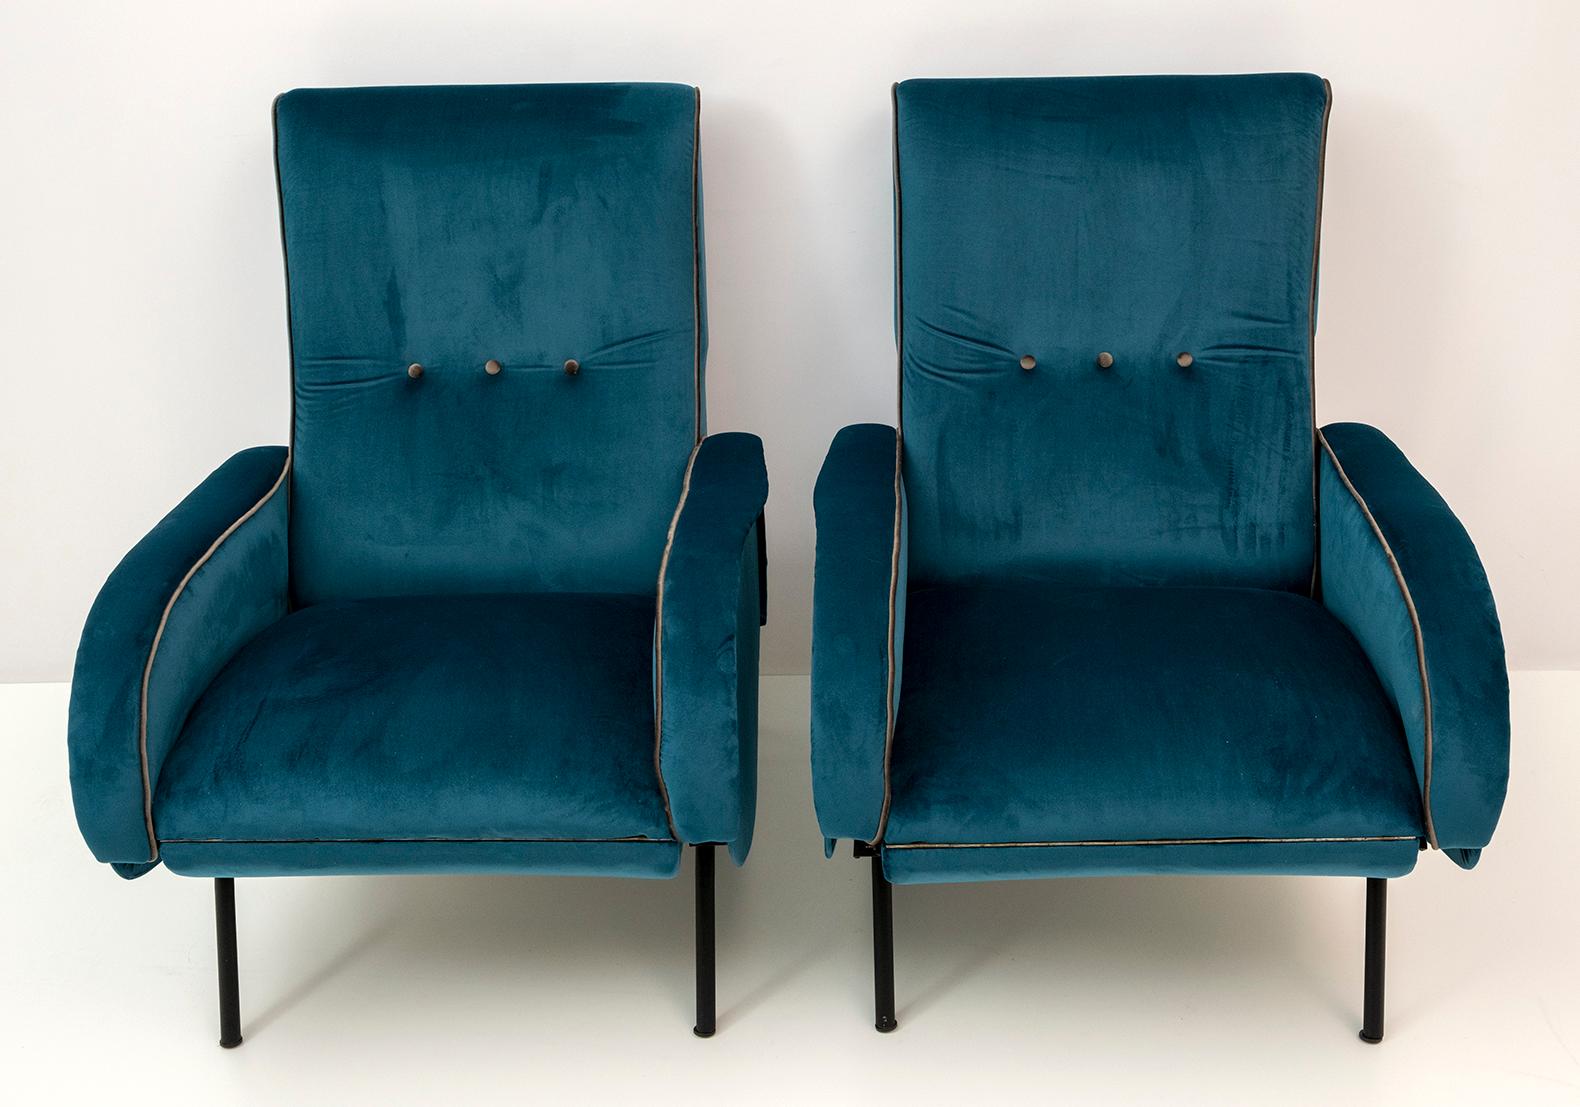 Pair of reclining armchairs designed by Marco Zanuso in the 1950s, the armchairs have been restored and upholstered in avio blue velvet with a gray mouse tail finish.

The elongated armchair measures 148 cm.